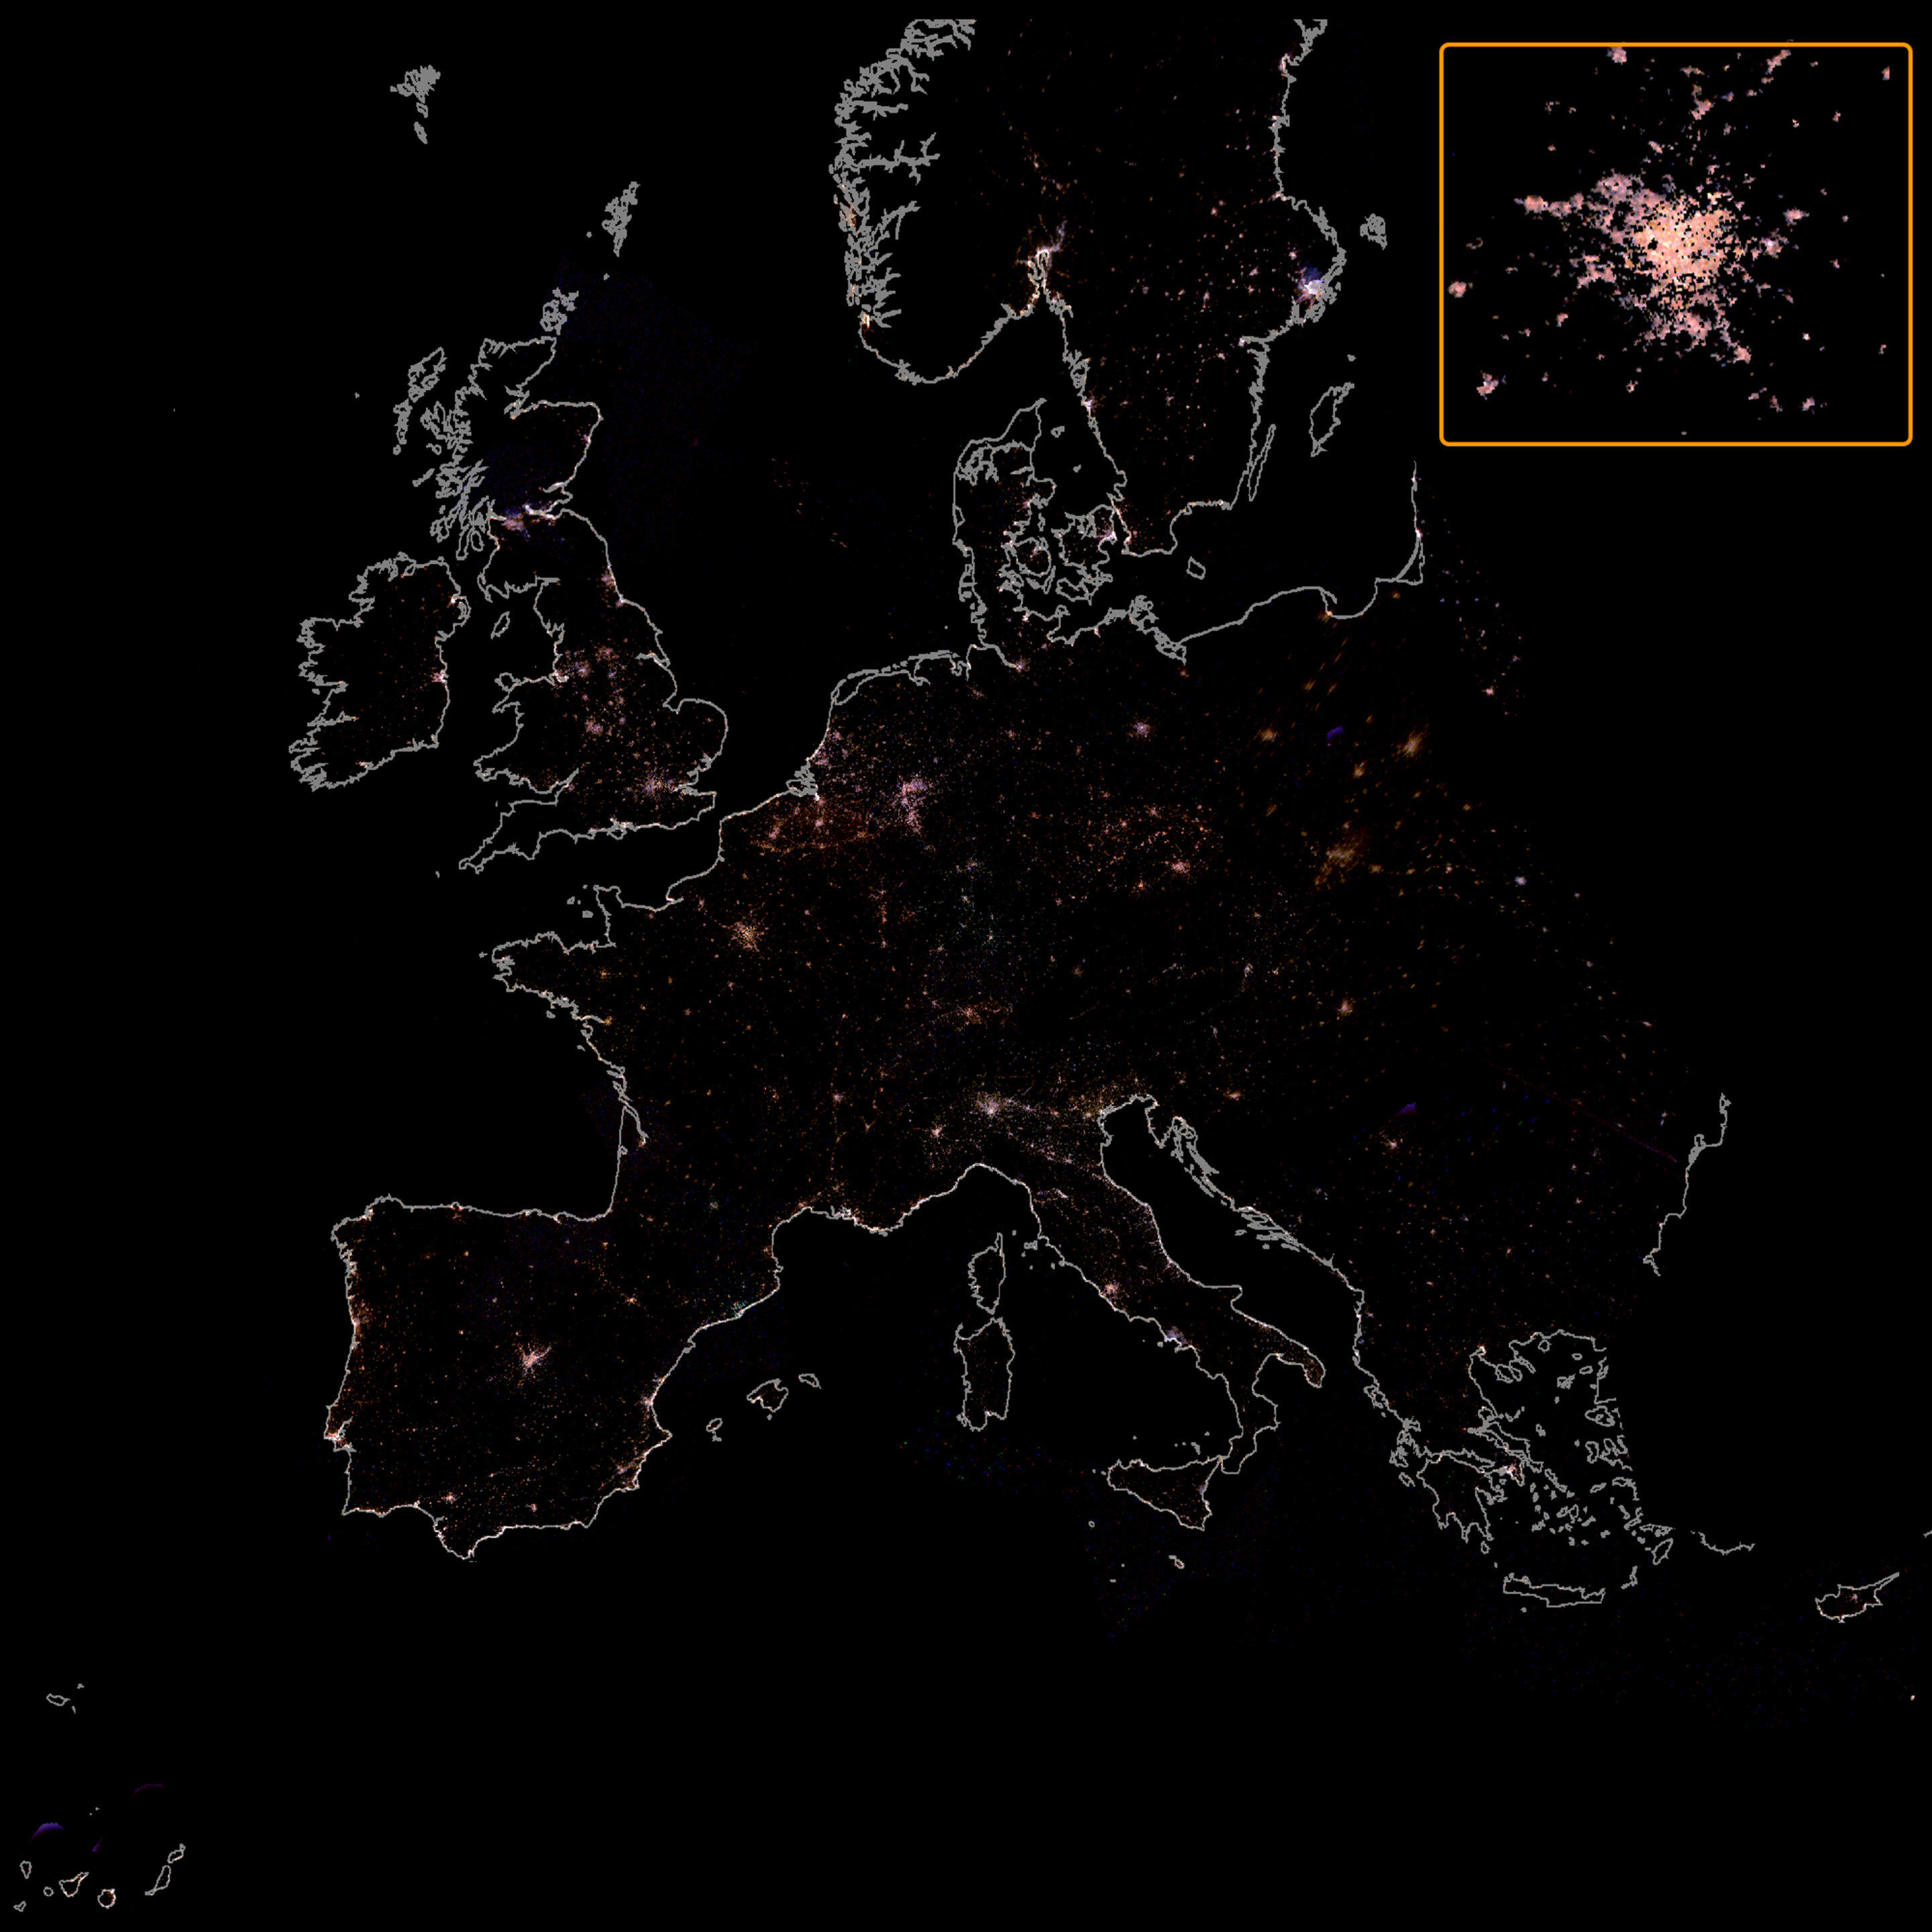 Conversion To Led Lighting Brings New Kind Of Light Pollution To Europe